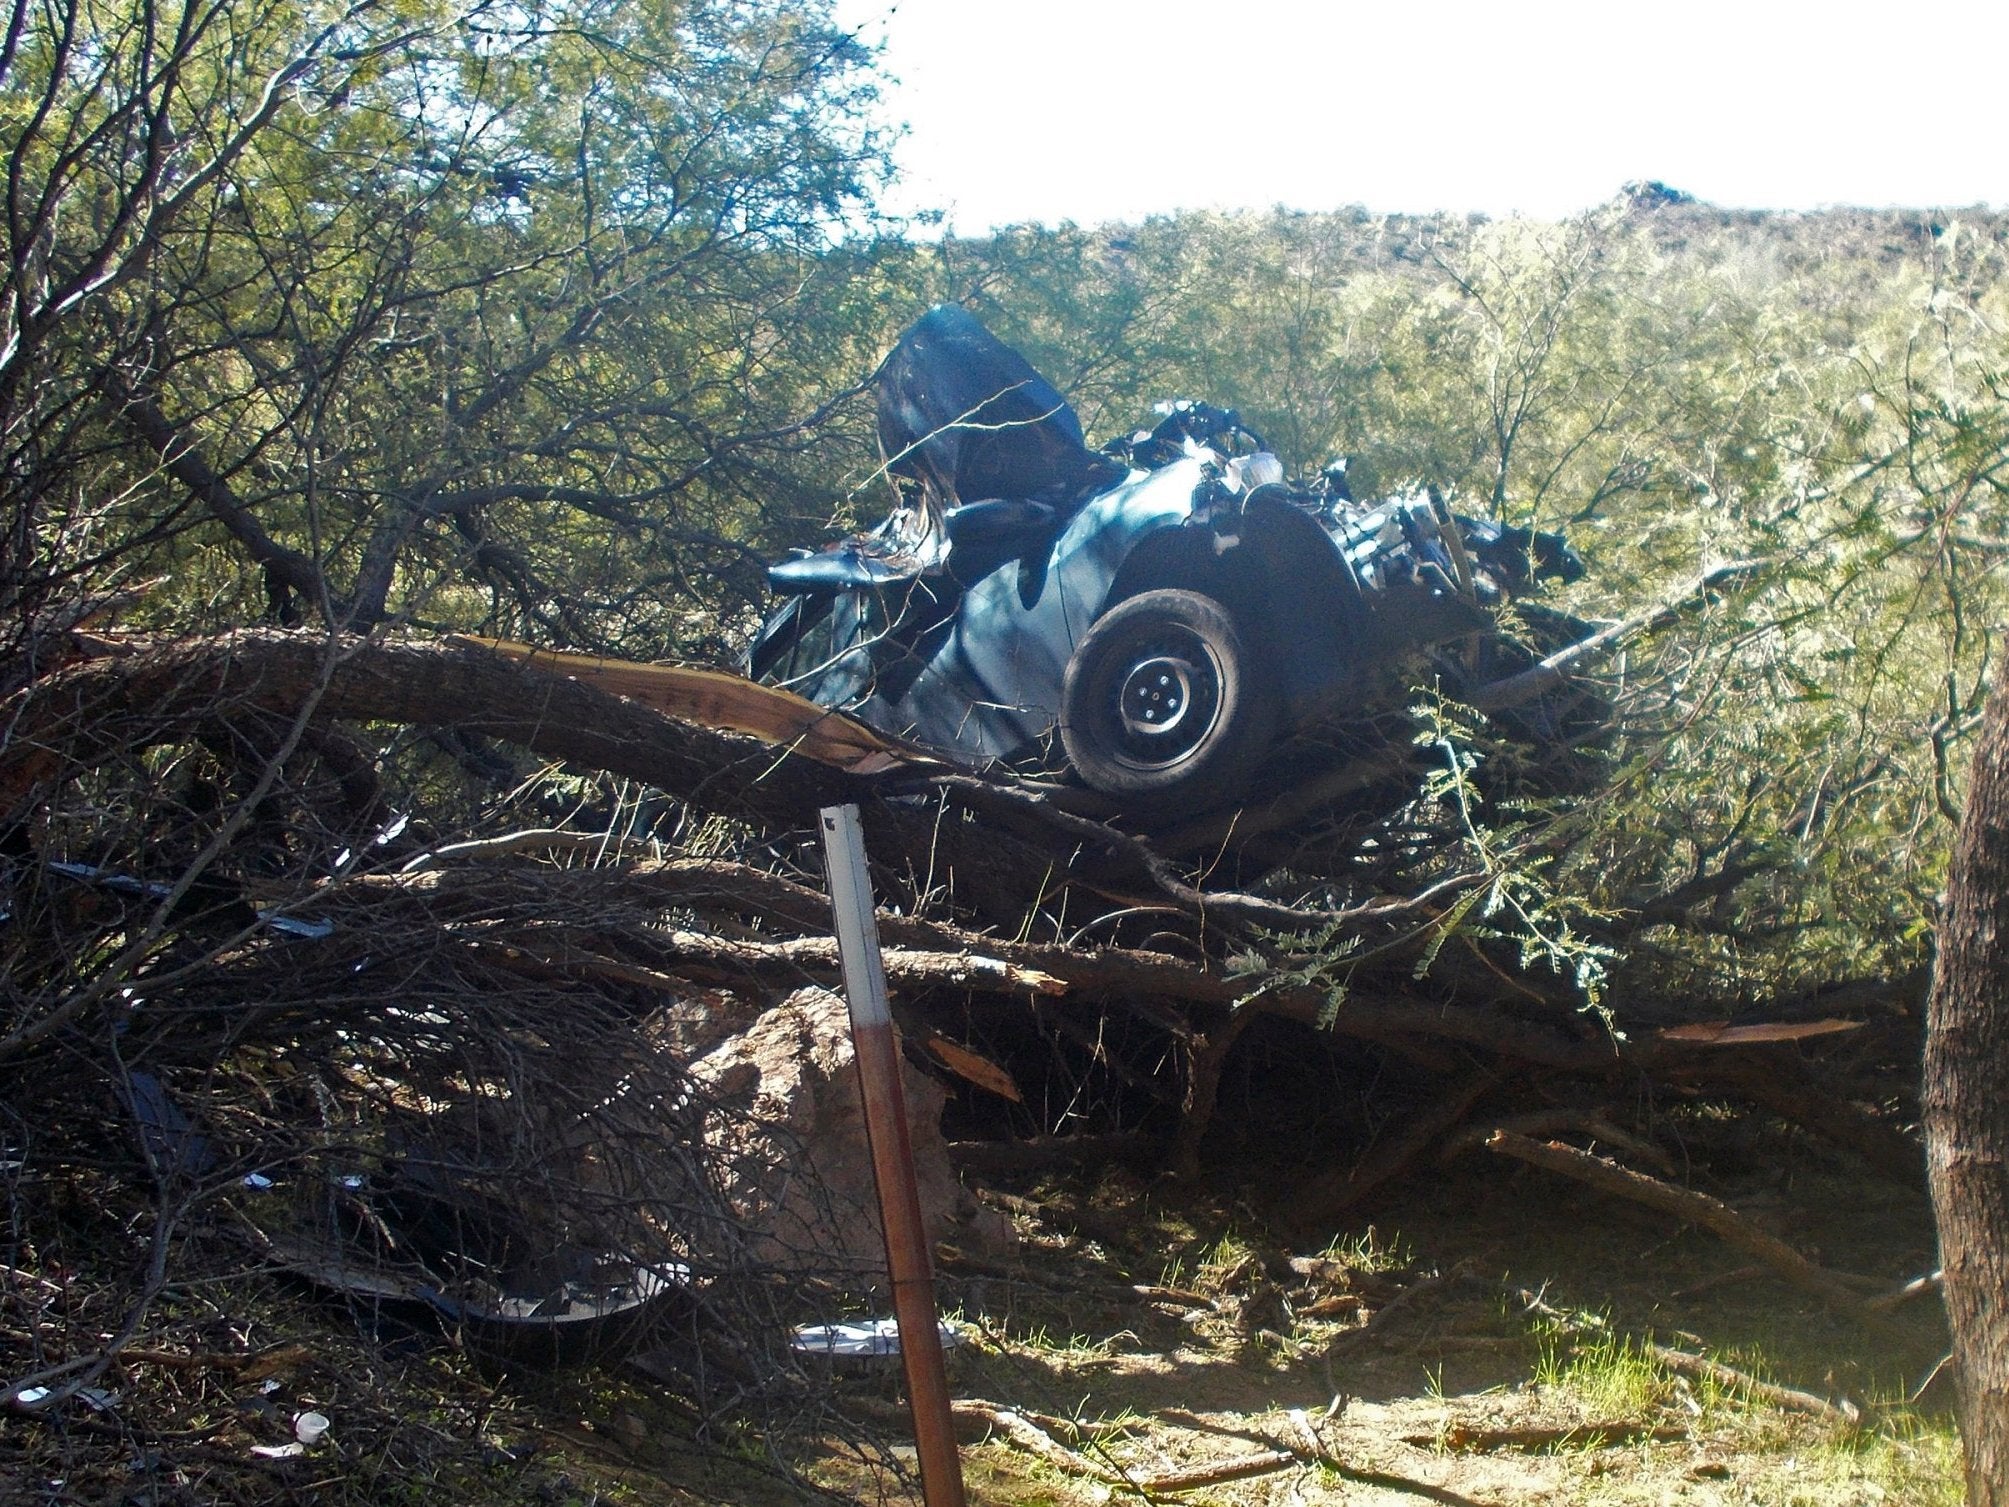 The woman's car was left mangled in a tree